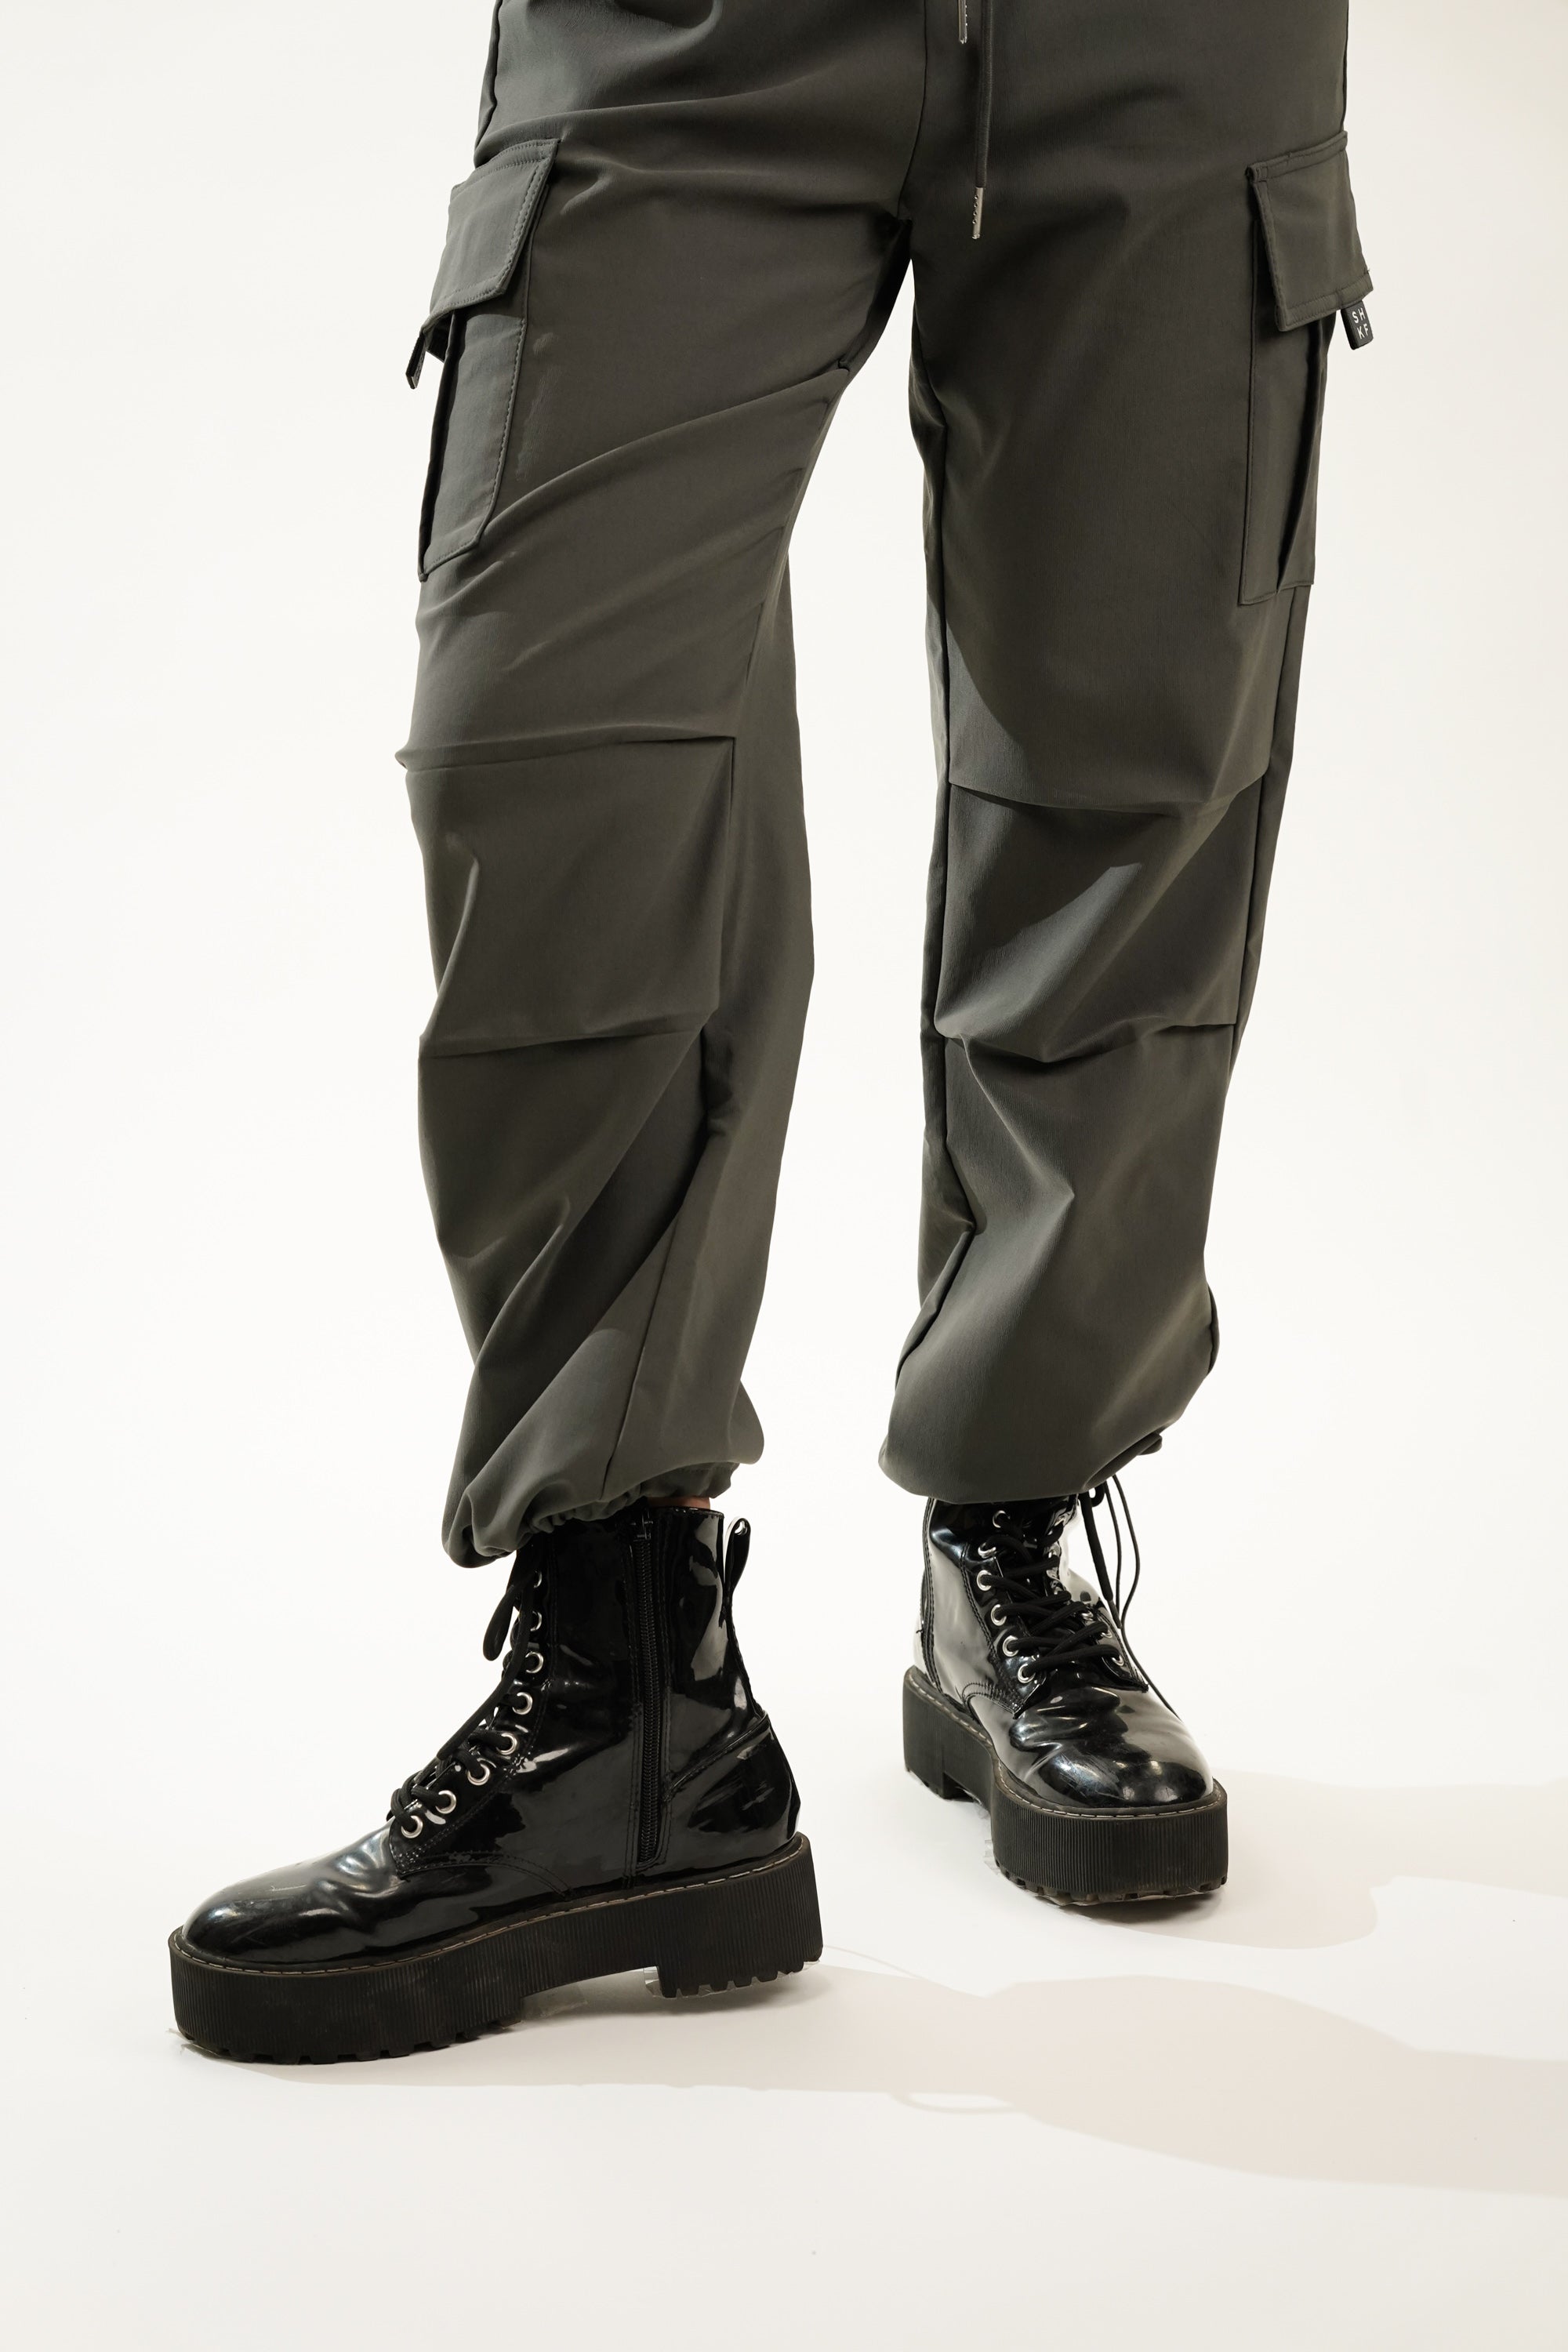 MWG COMFORT WEAVE FR Utility Pant » MWG Professional Gear